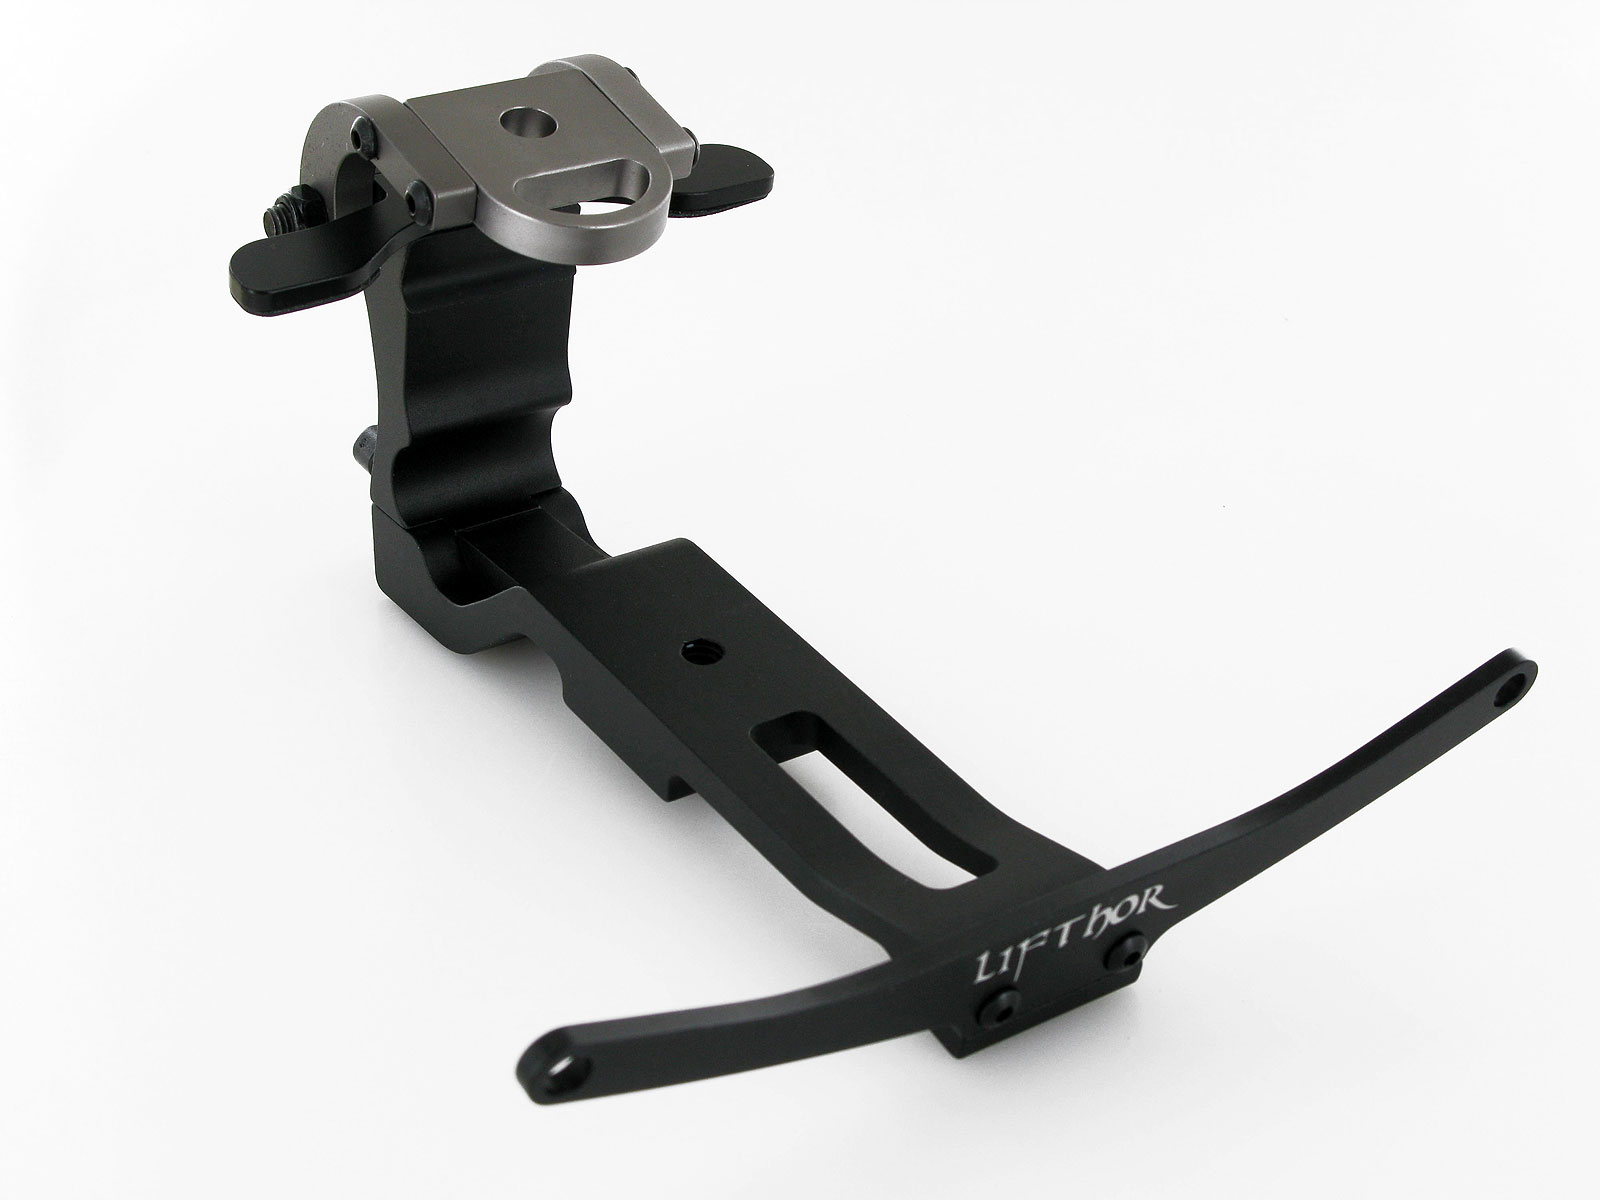 LifThor RC Pro - External Display Mount for DJI RC Pro - Drone